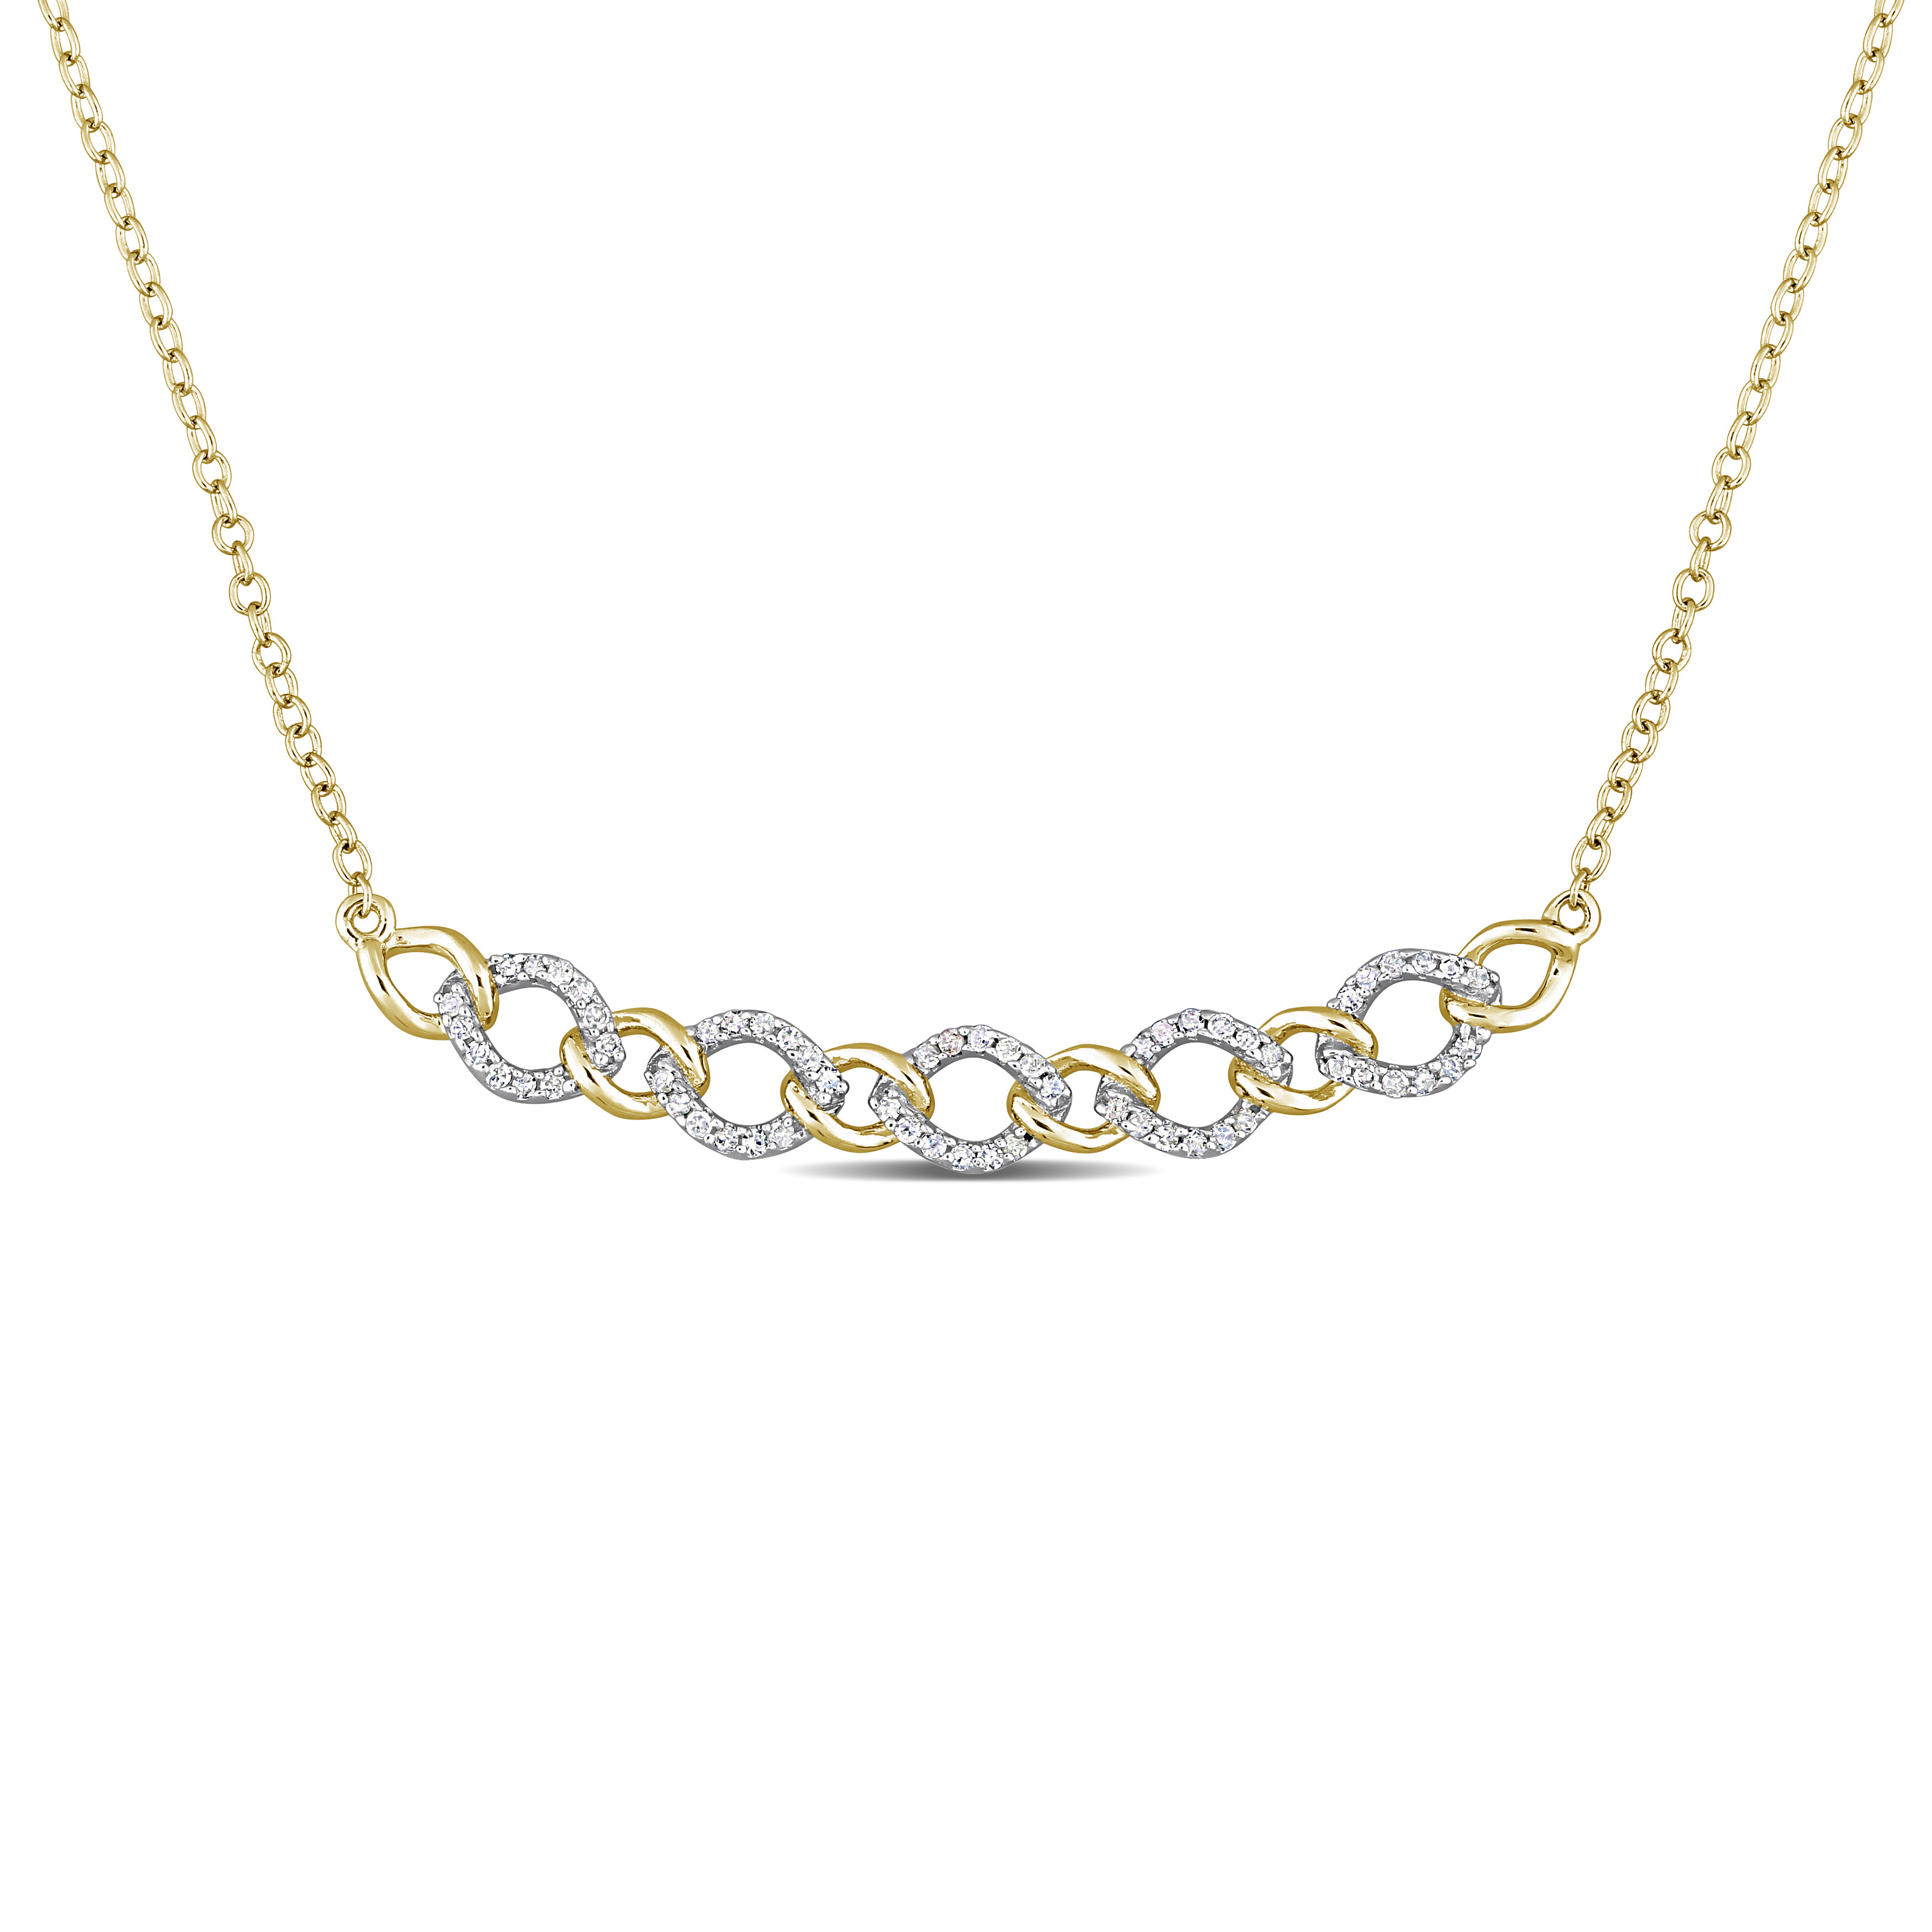 1/5 CT TDW Diamond Oval Link Necklace in Yellow Plated Sterling Silver - 18 in.